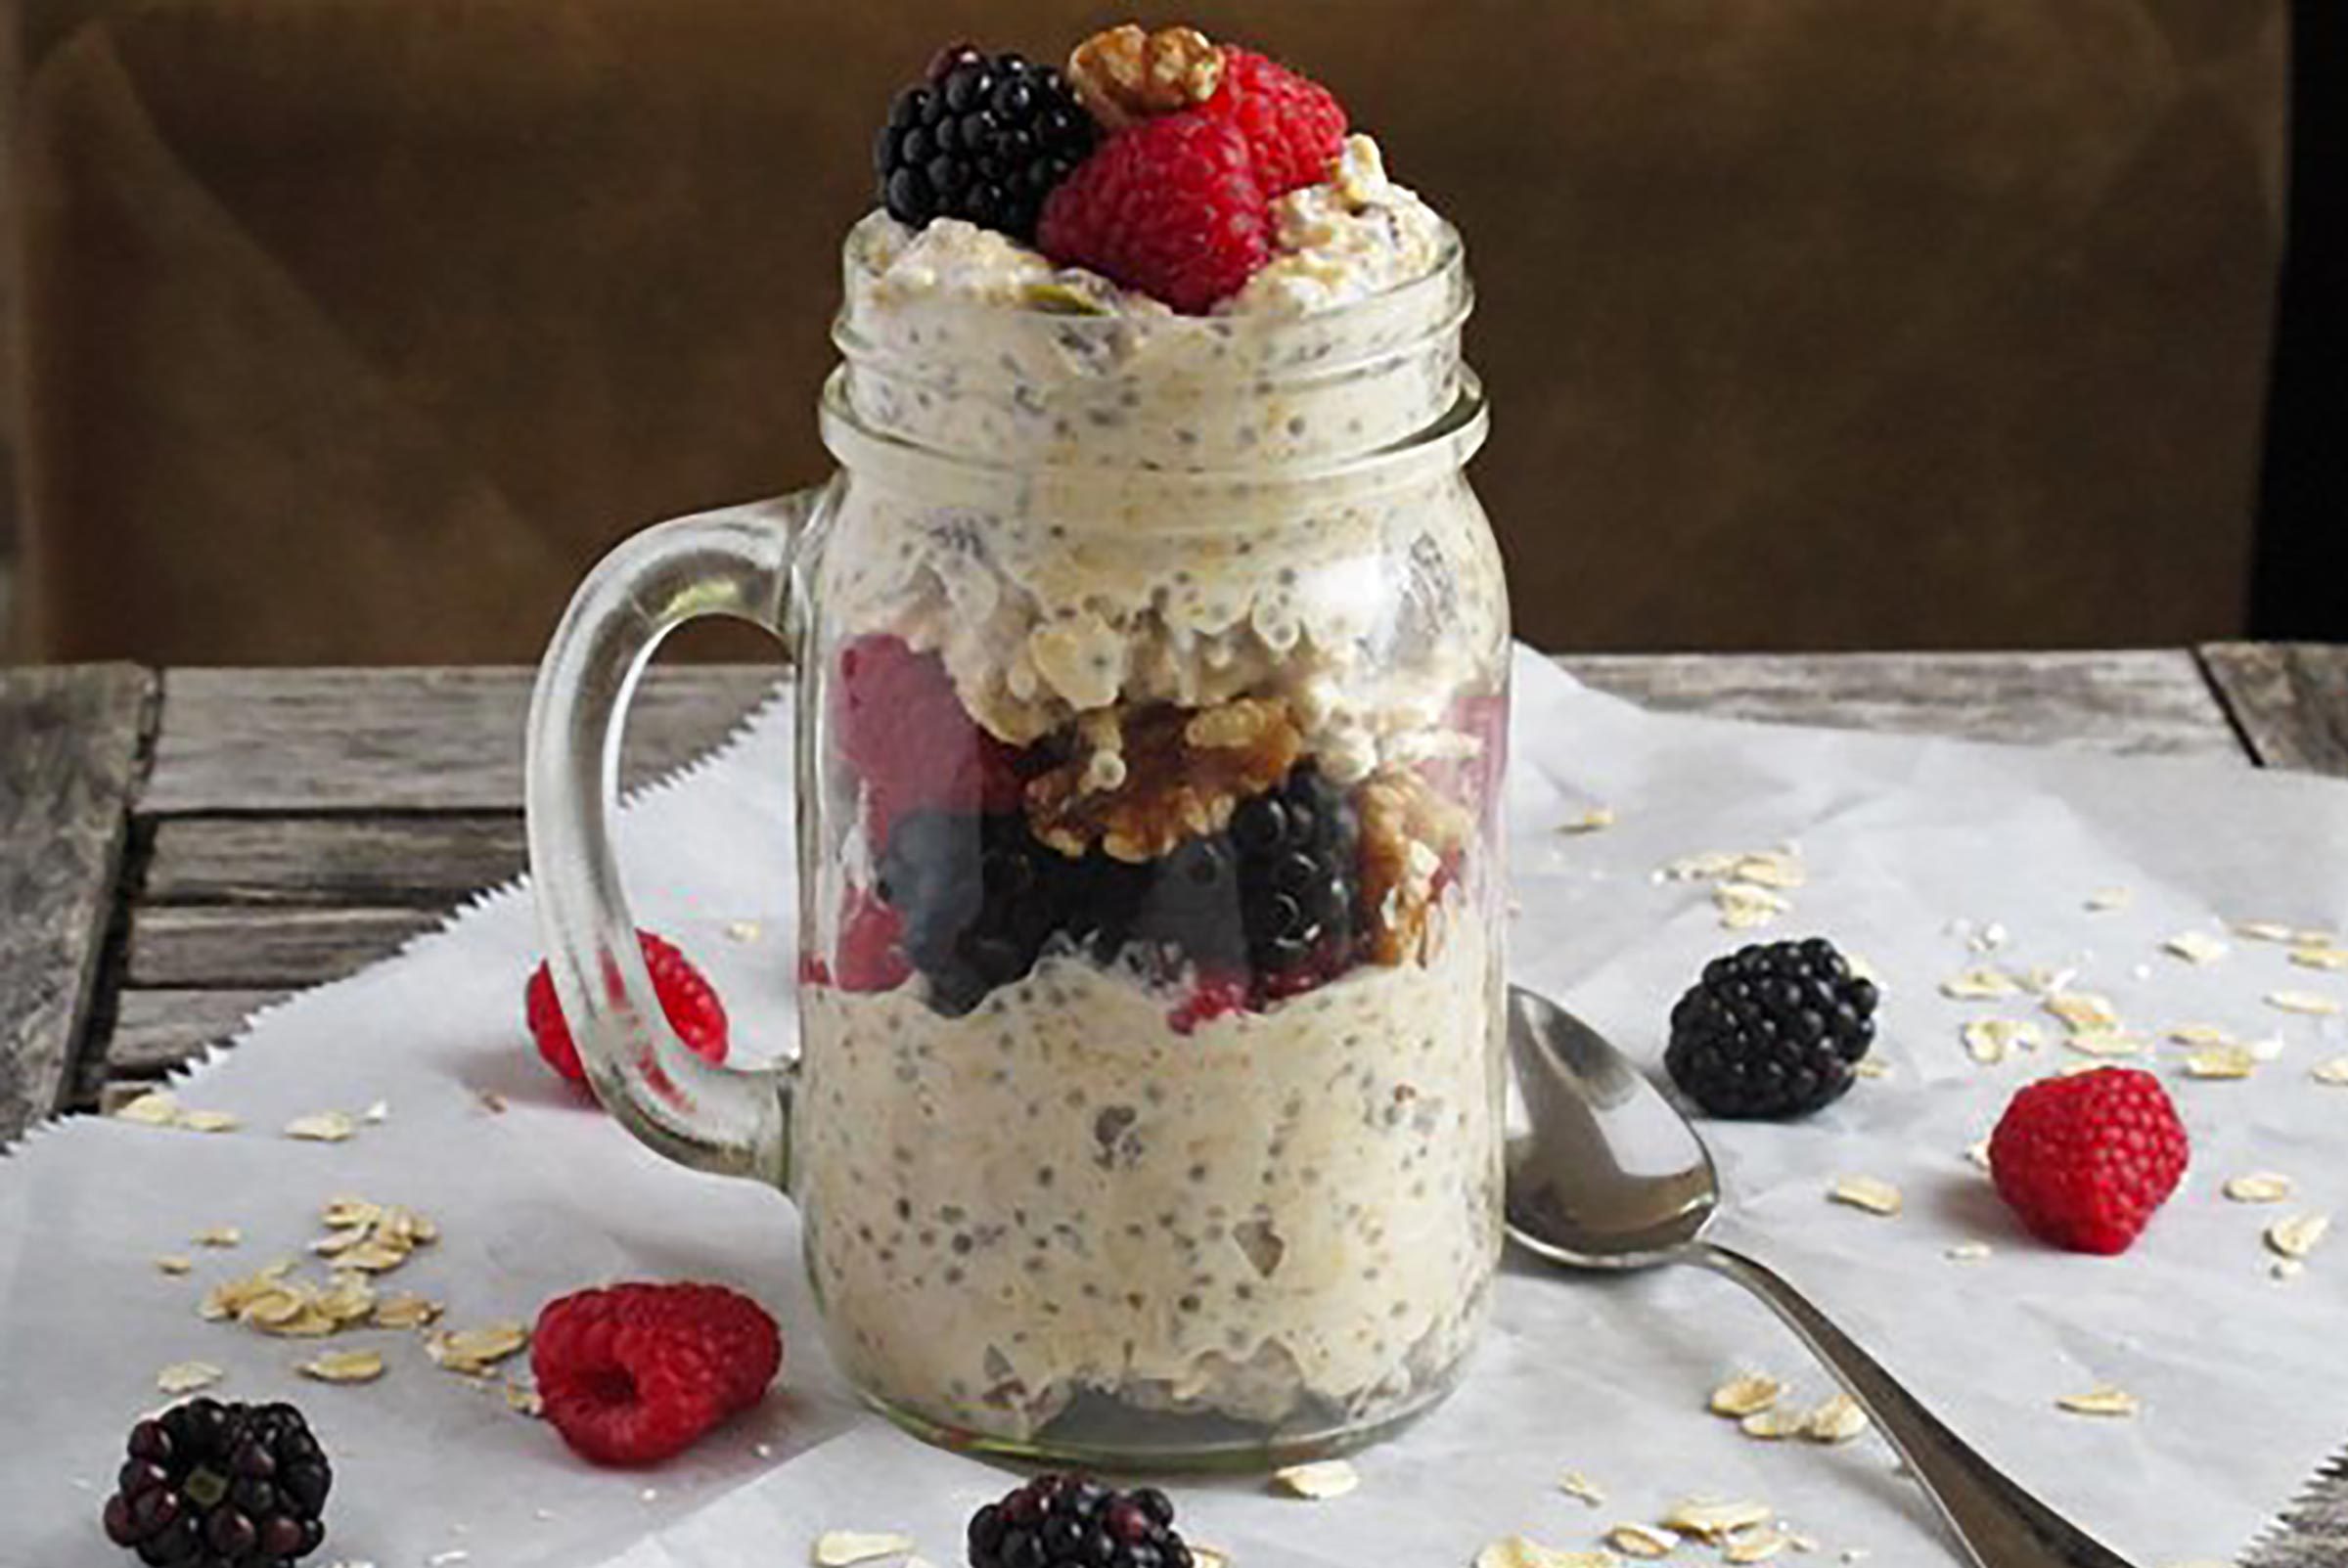 10 Delicious Ways to Sneak More Chia Seeds into Your Diet